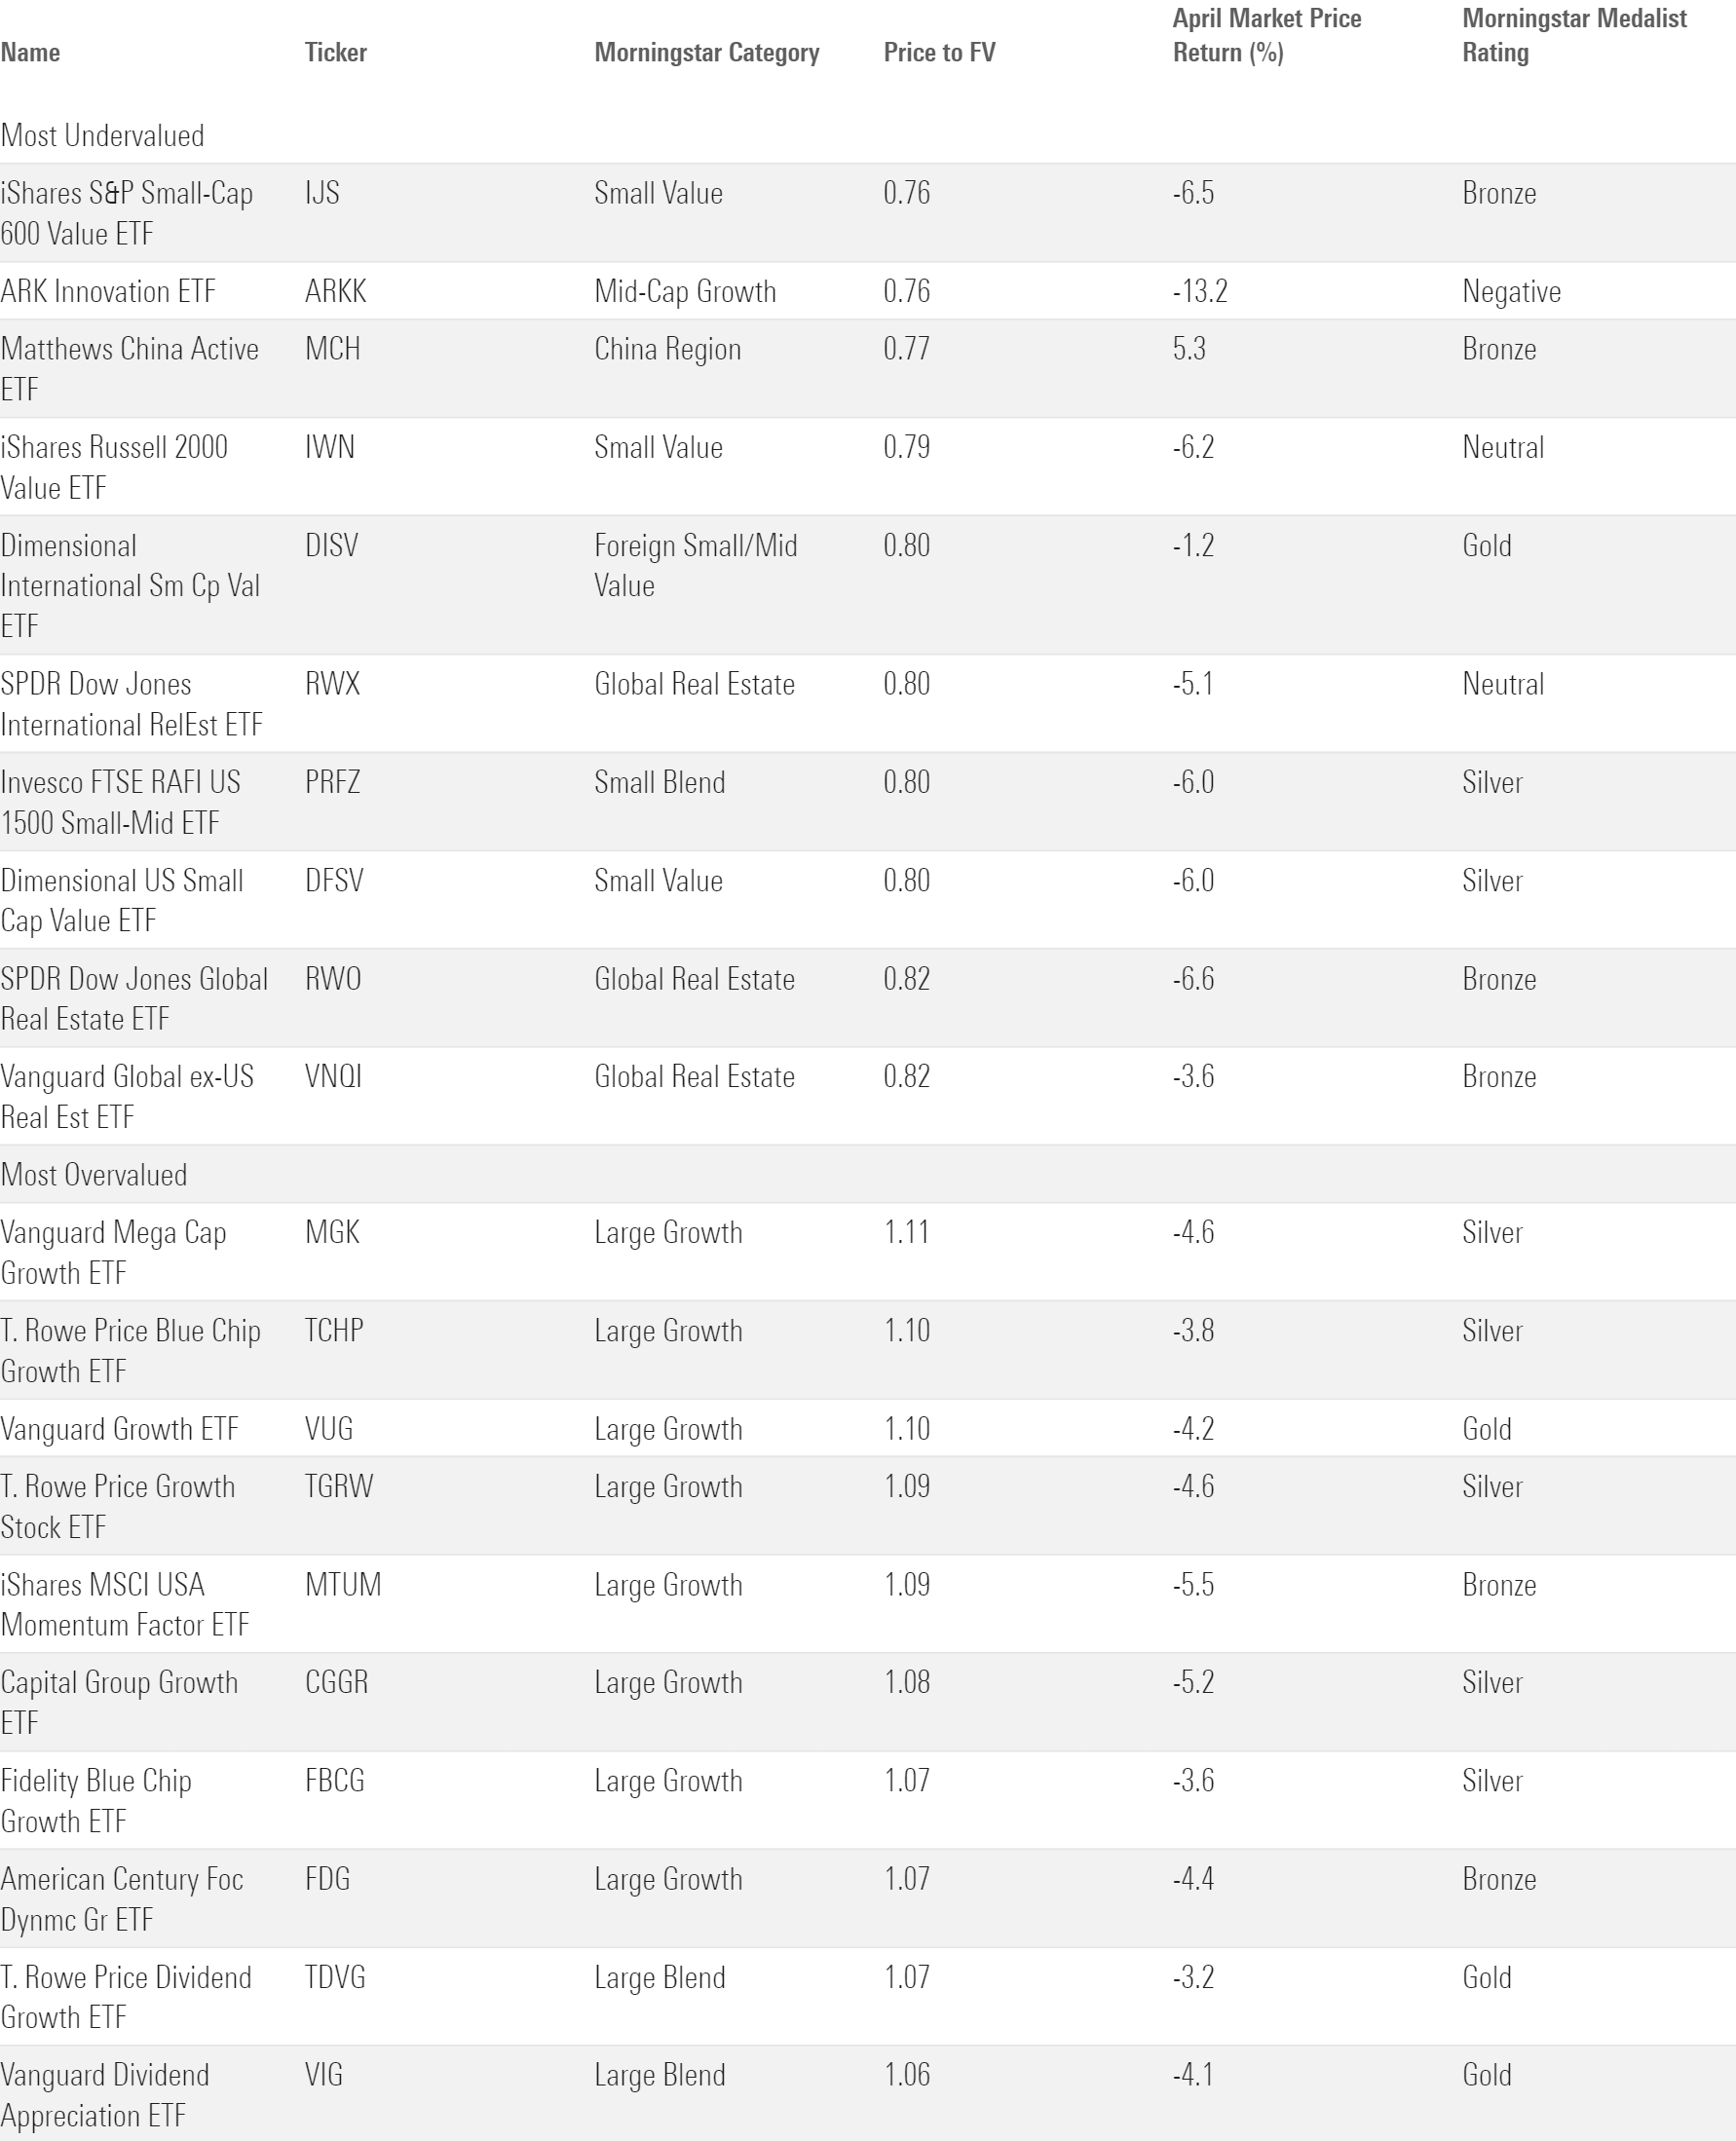 Table of the 10 most over- and undervalued ETFs based on the Morningstar price/fair value ratio.